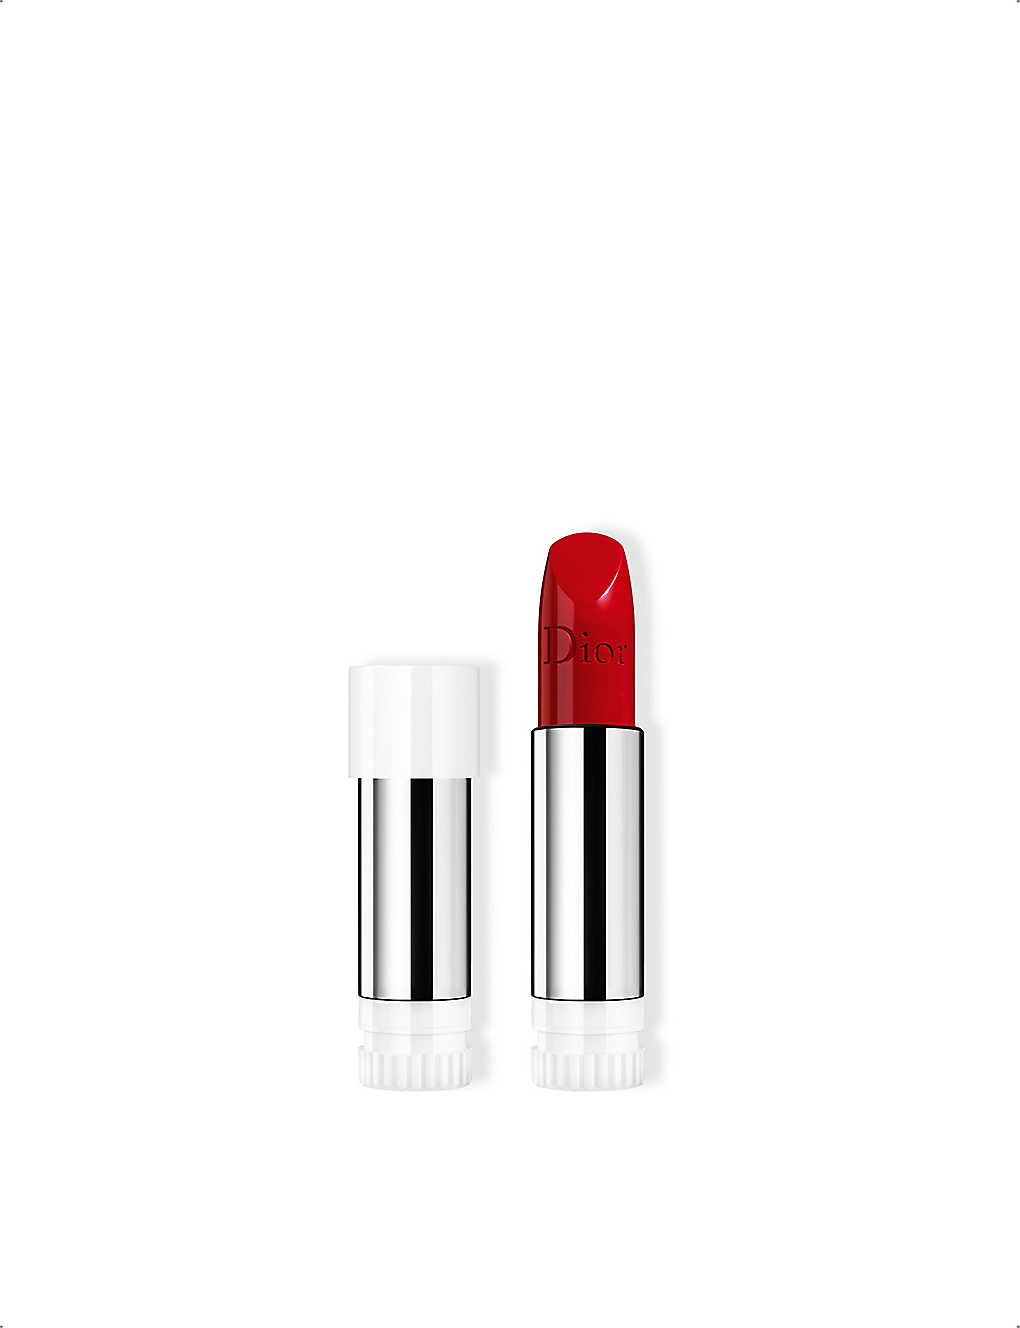 Dior Rouge  Couture Satin Lipstick Refill 3.5g In 999 Satin